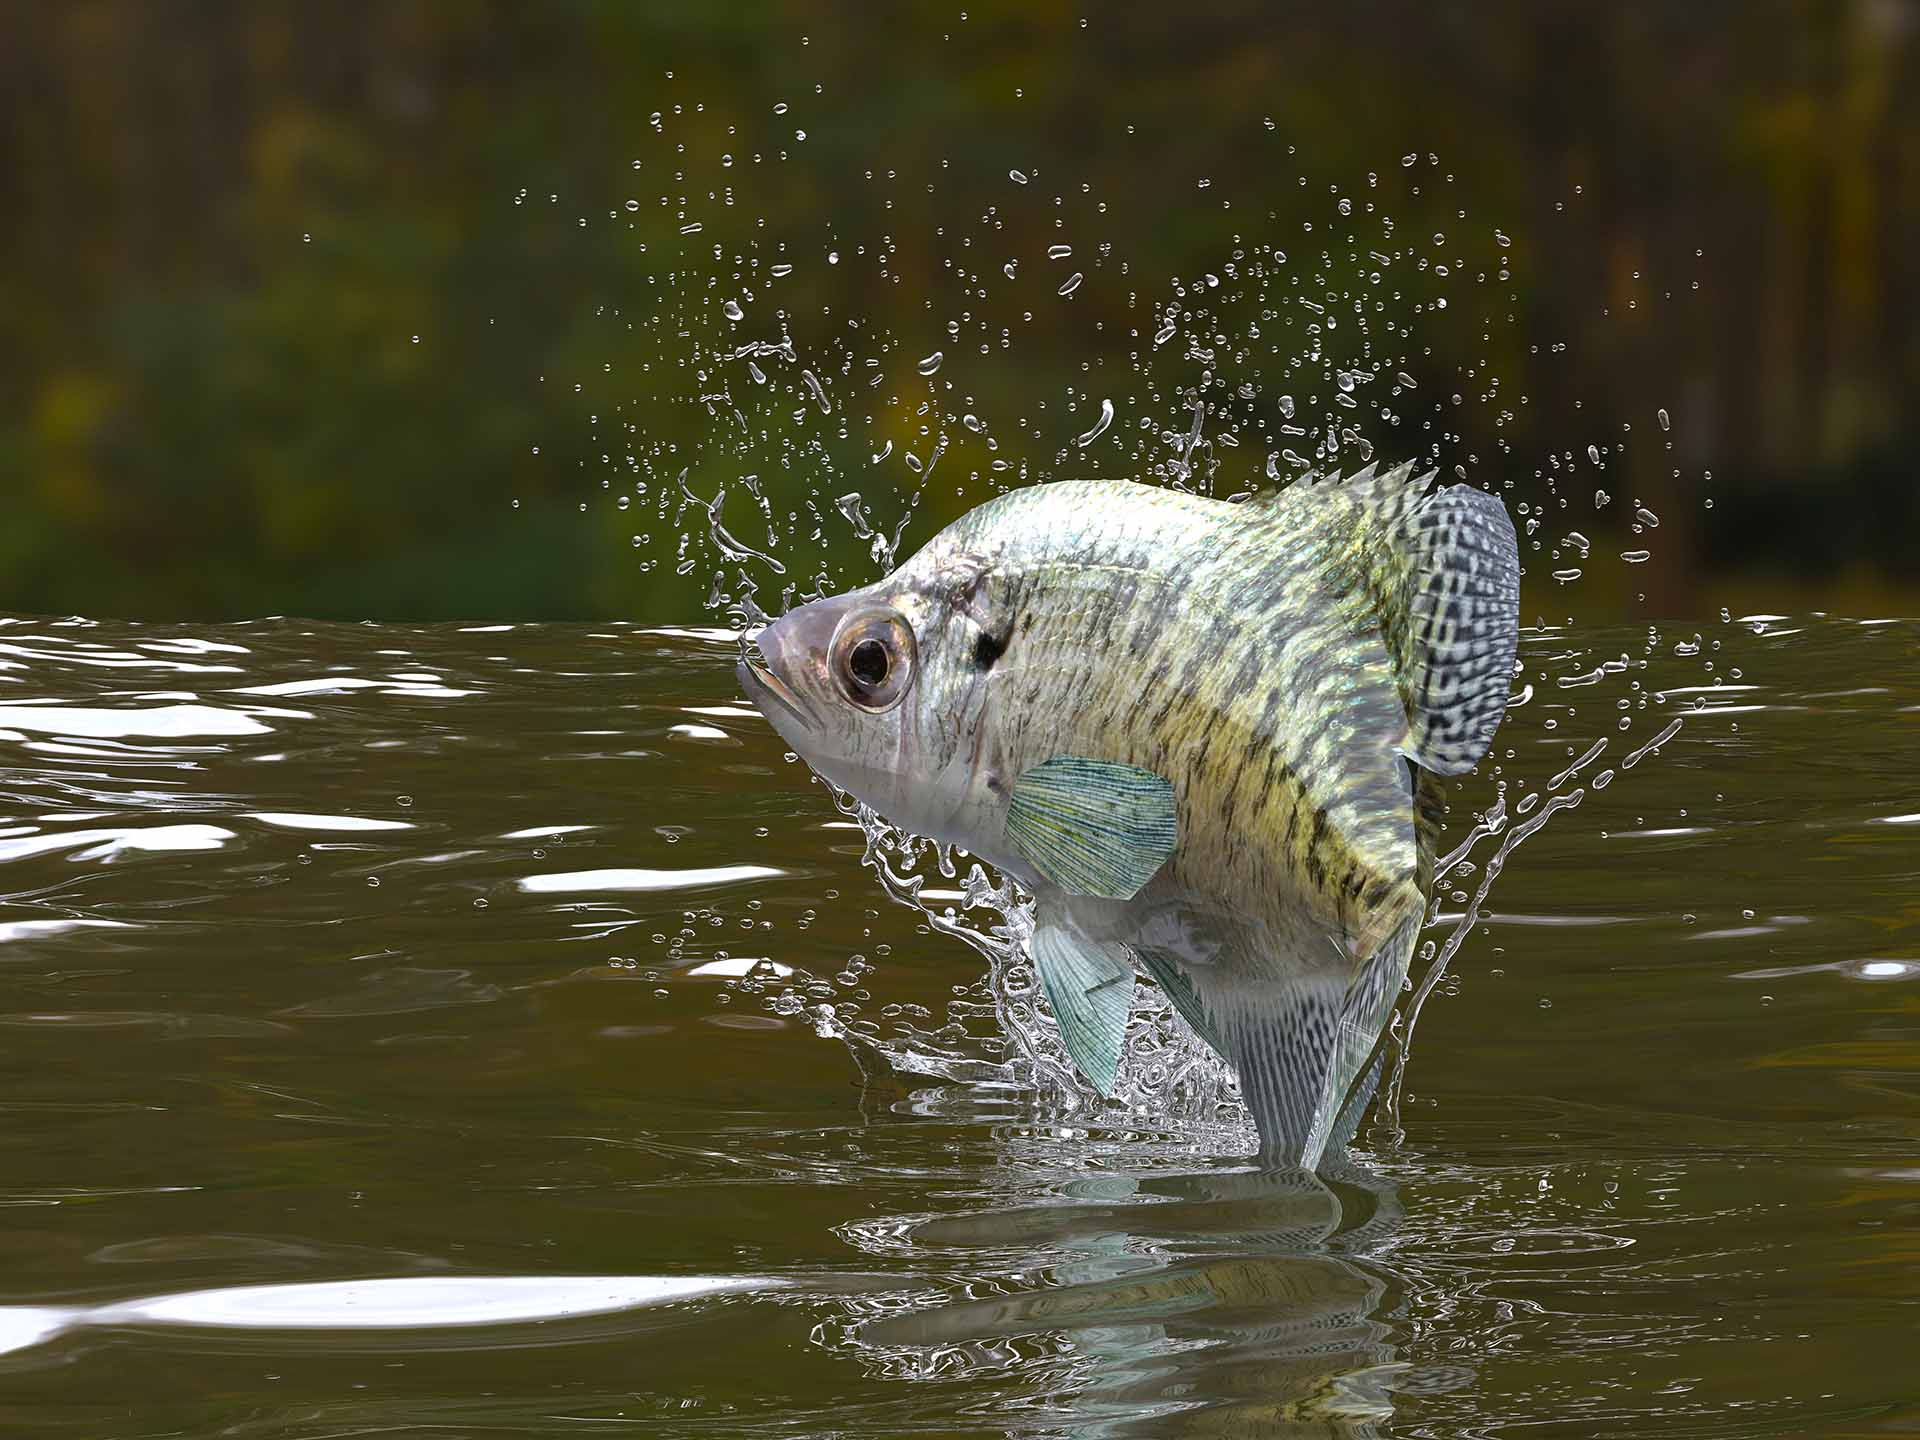 Crappie jumping in water